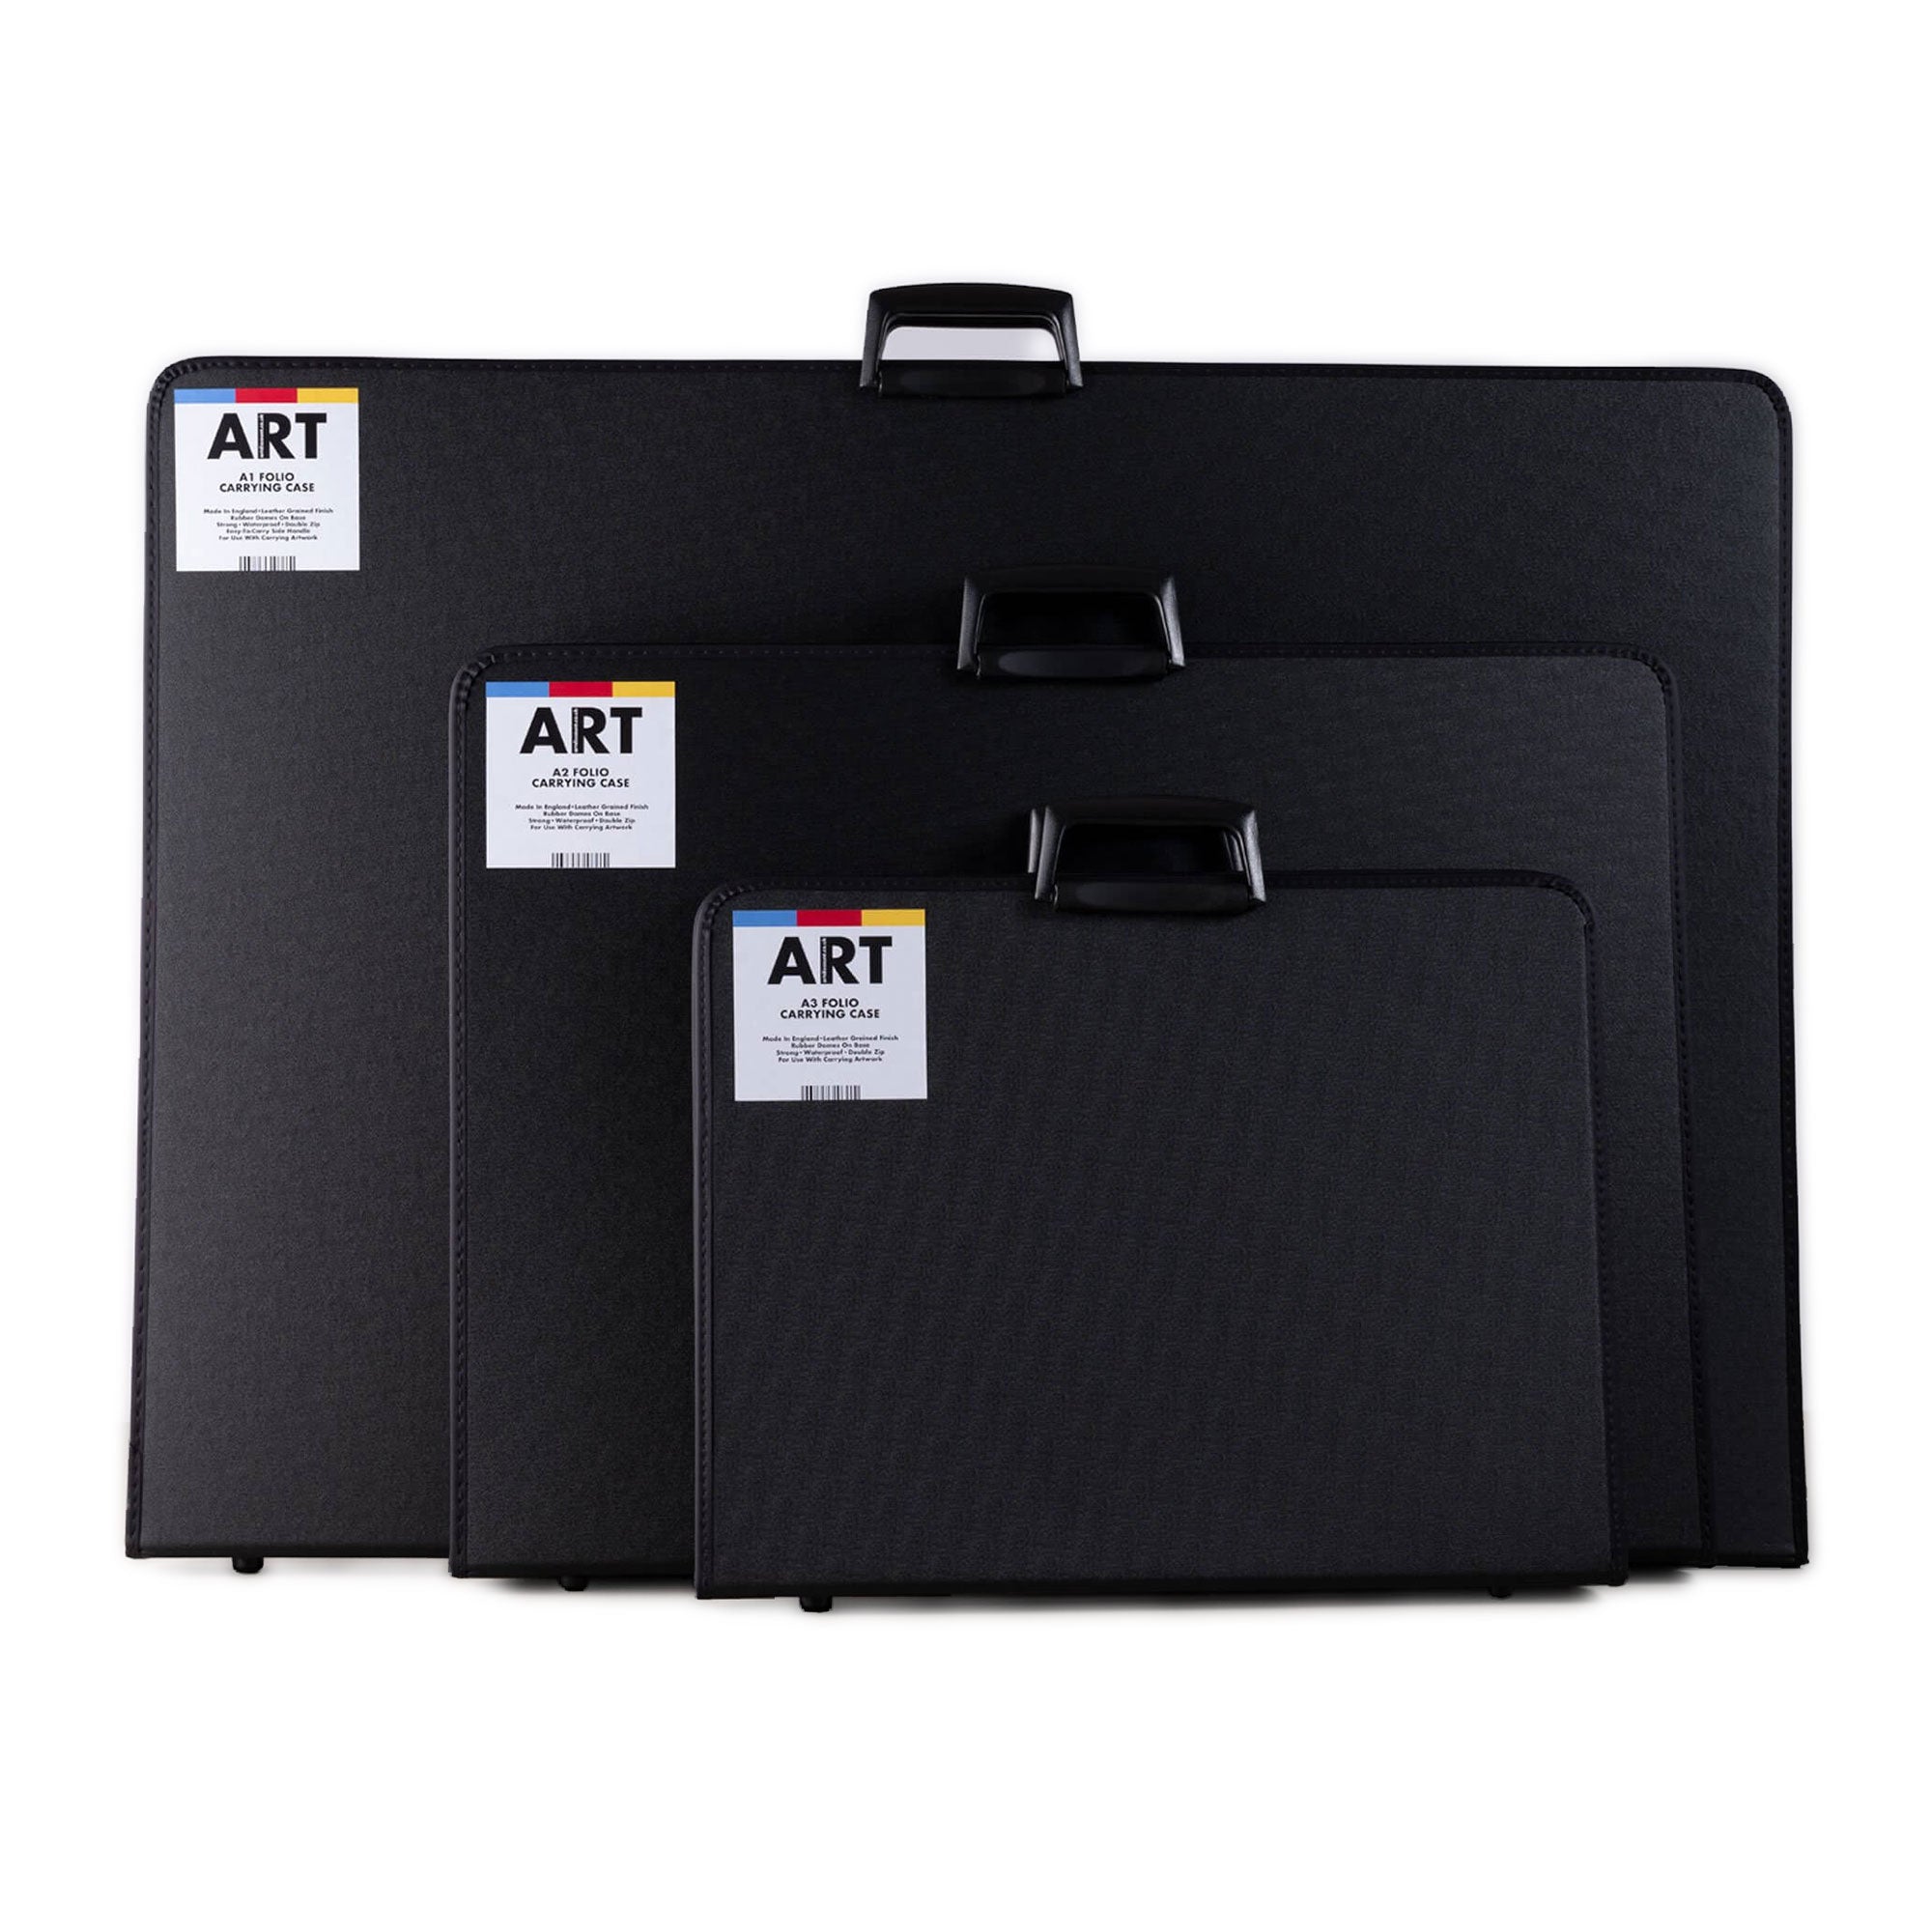 ARTdiscount Folio Carrying Case sizes A3, A2, and A1